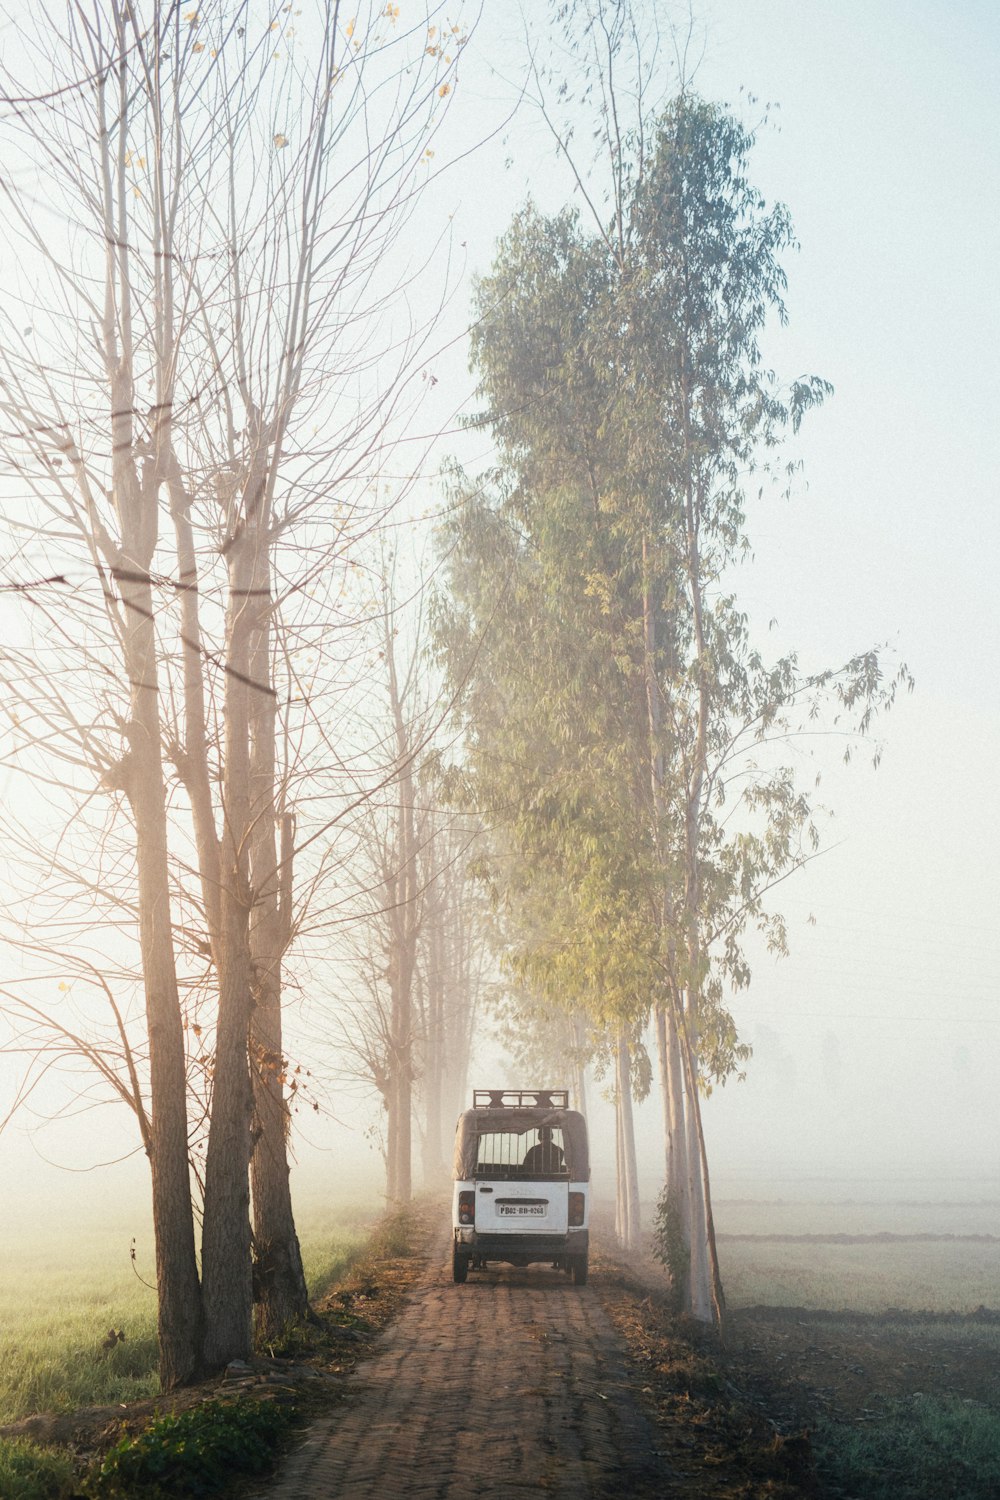 a truck parked on a dirt road between trees